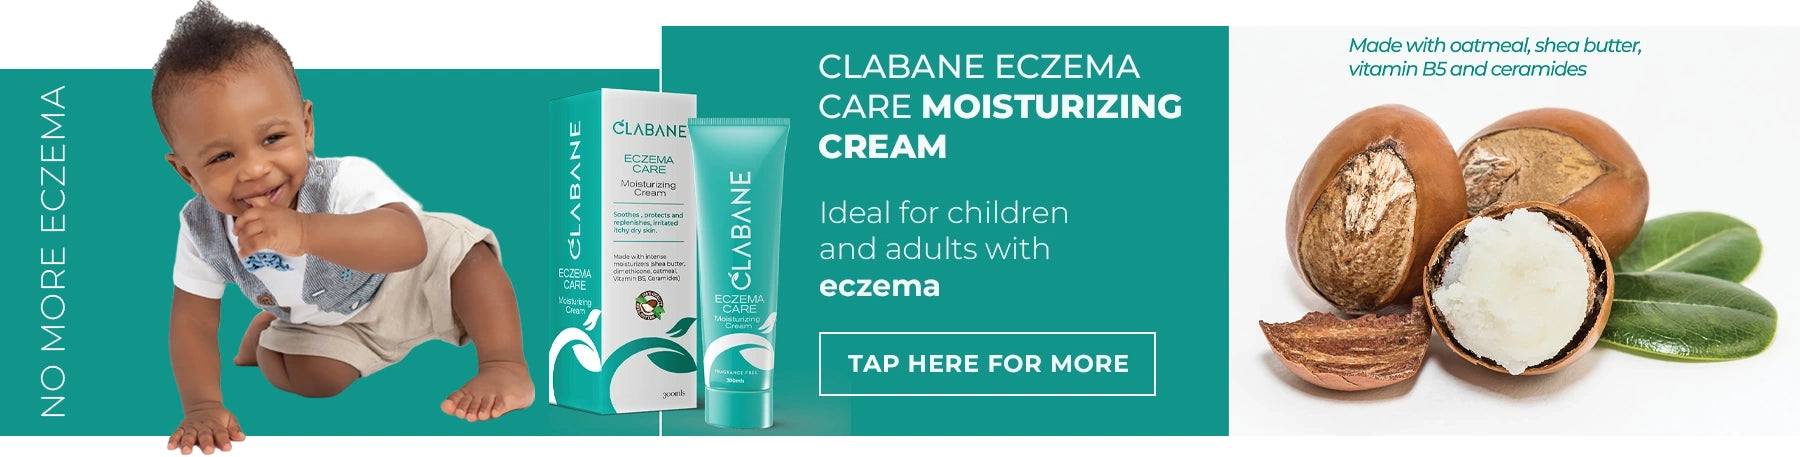 Clabane Eczema Care Moisturising Cream - Ideal for Children and Adults with Eczema